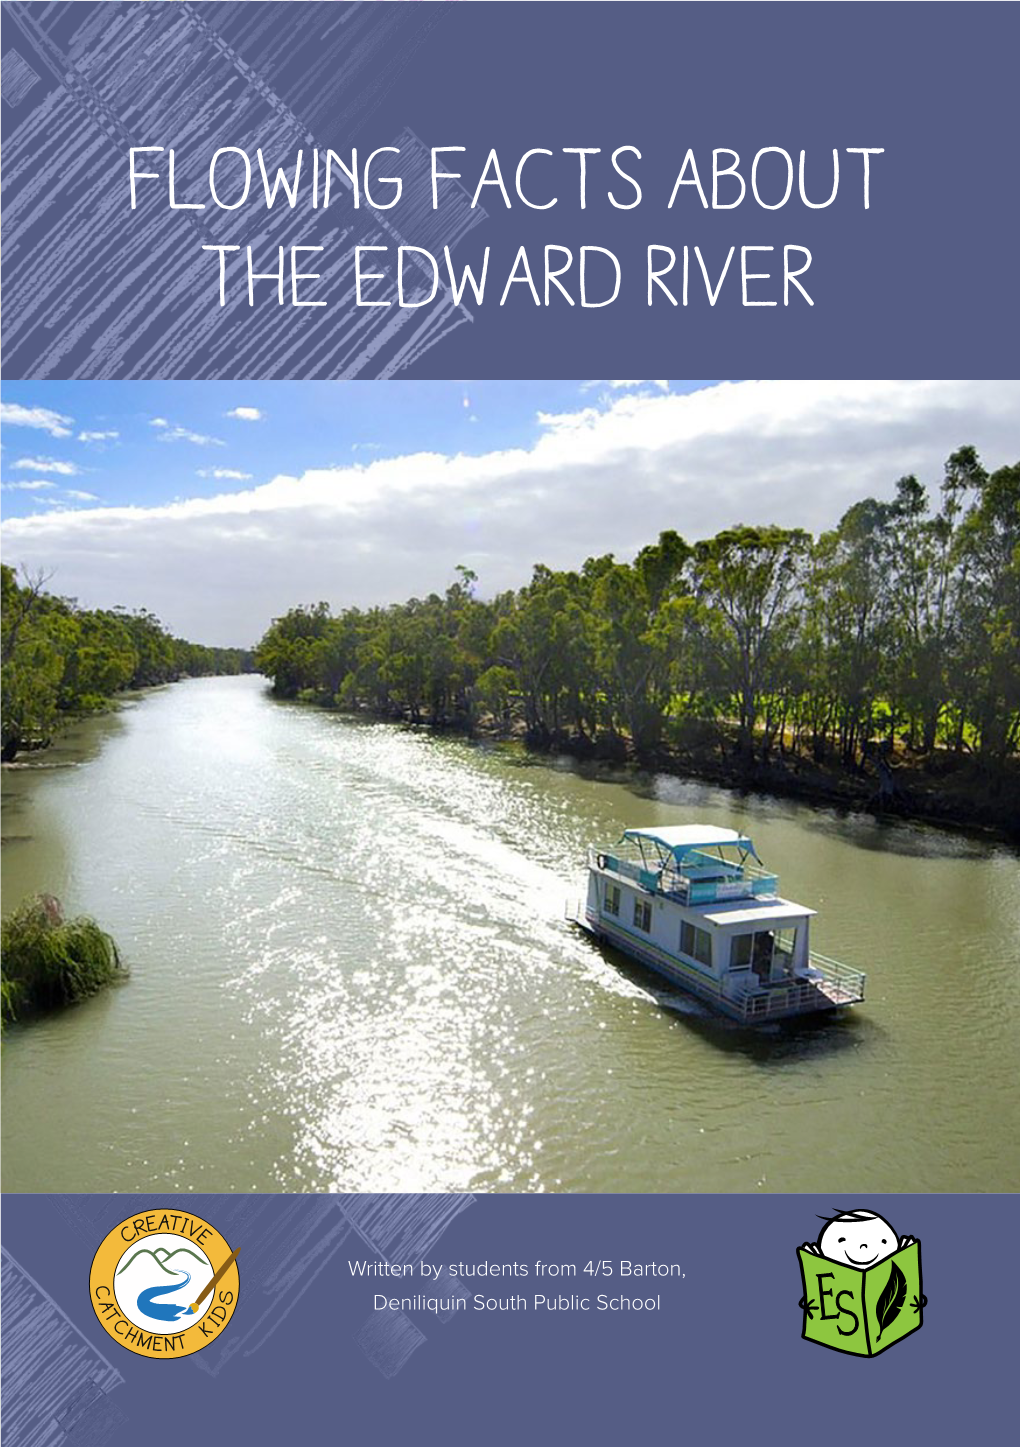 Flowing Facts About the Edward River